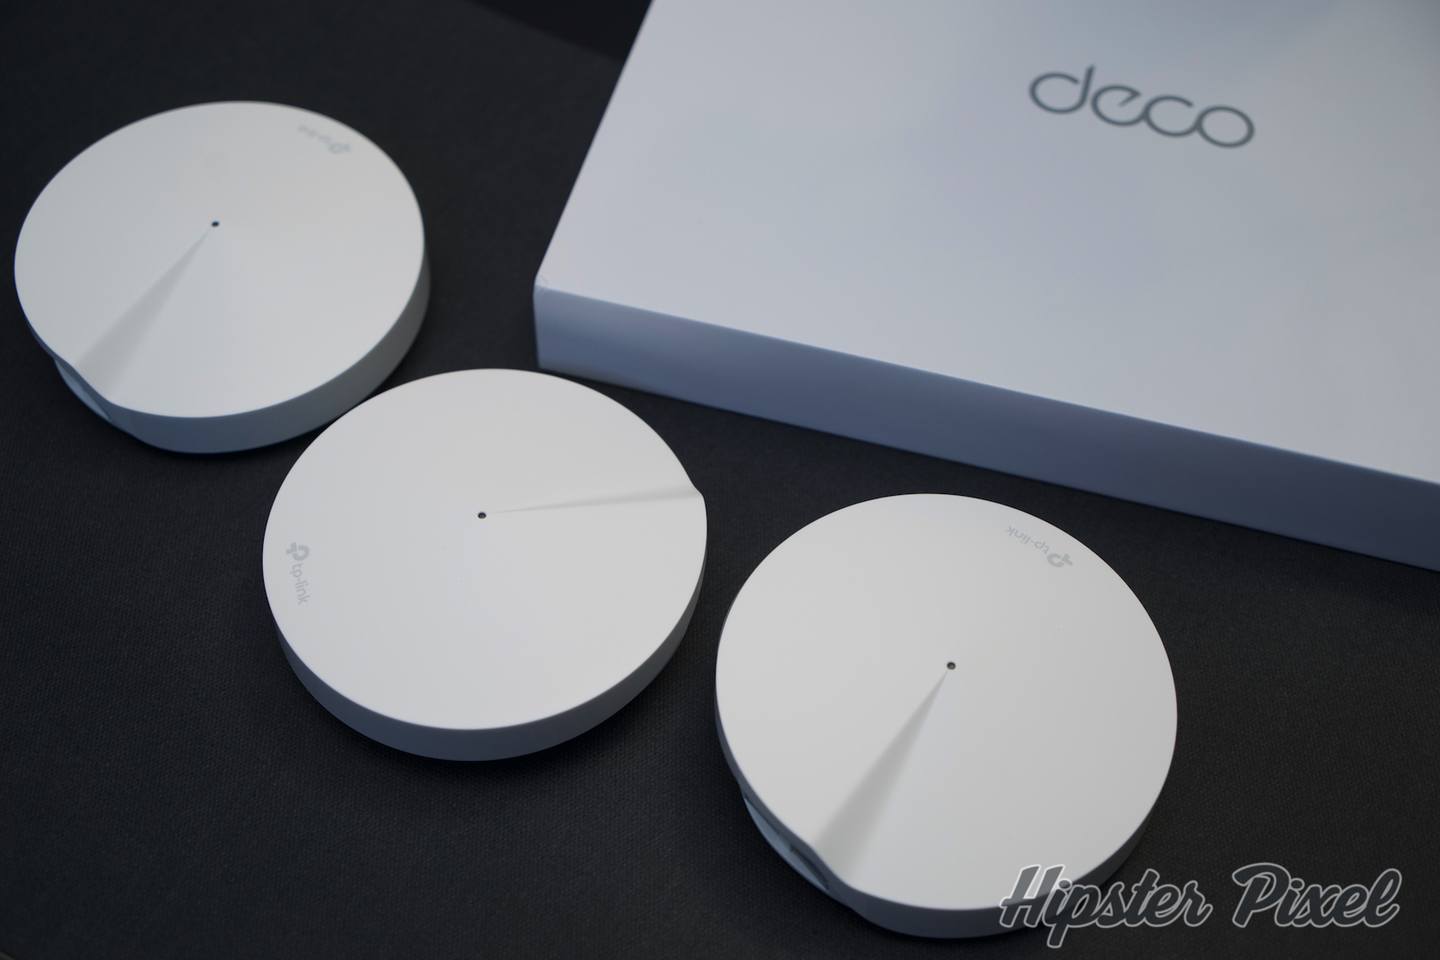 TP-Link Deco, Mesh Networking Differently [Review]